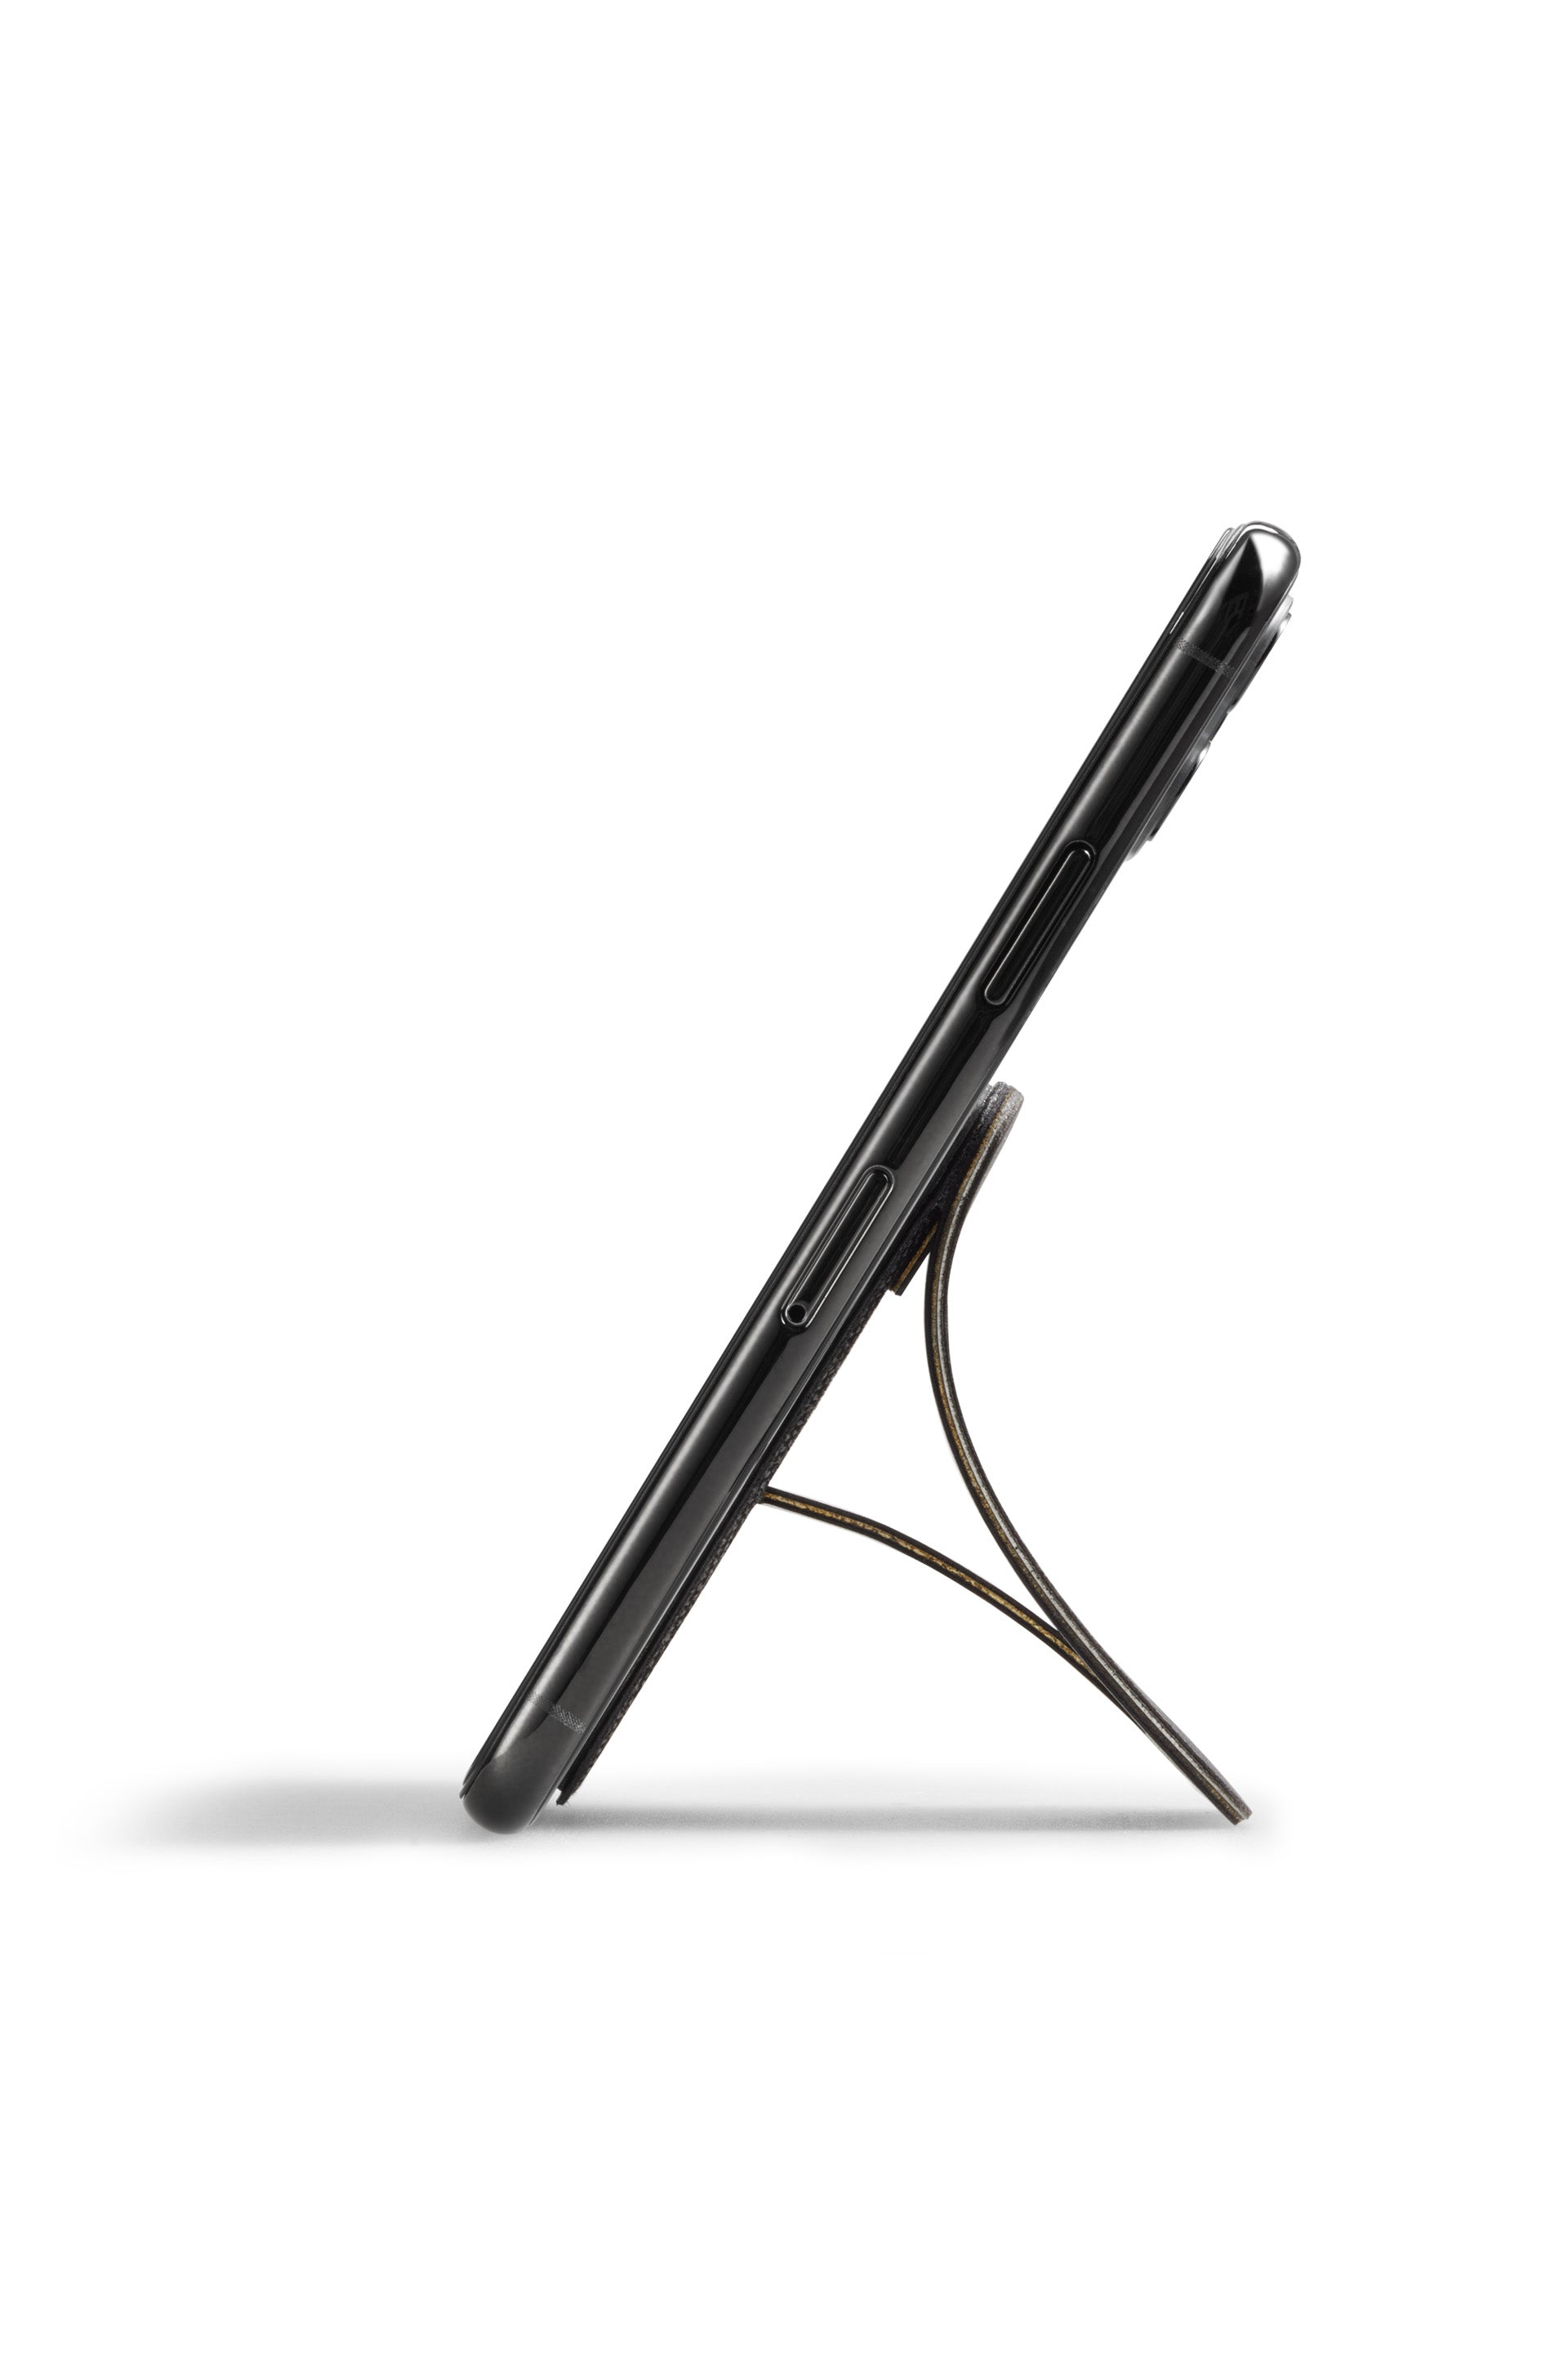 MOFT 2-in-1 Grip & Stand for Phone and Kindle